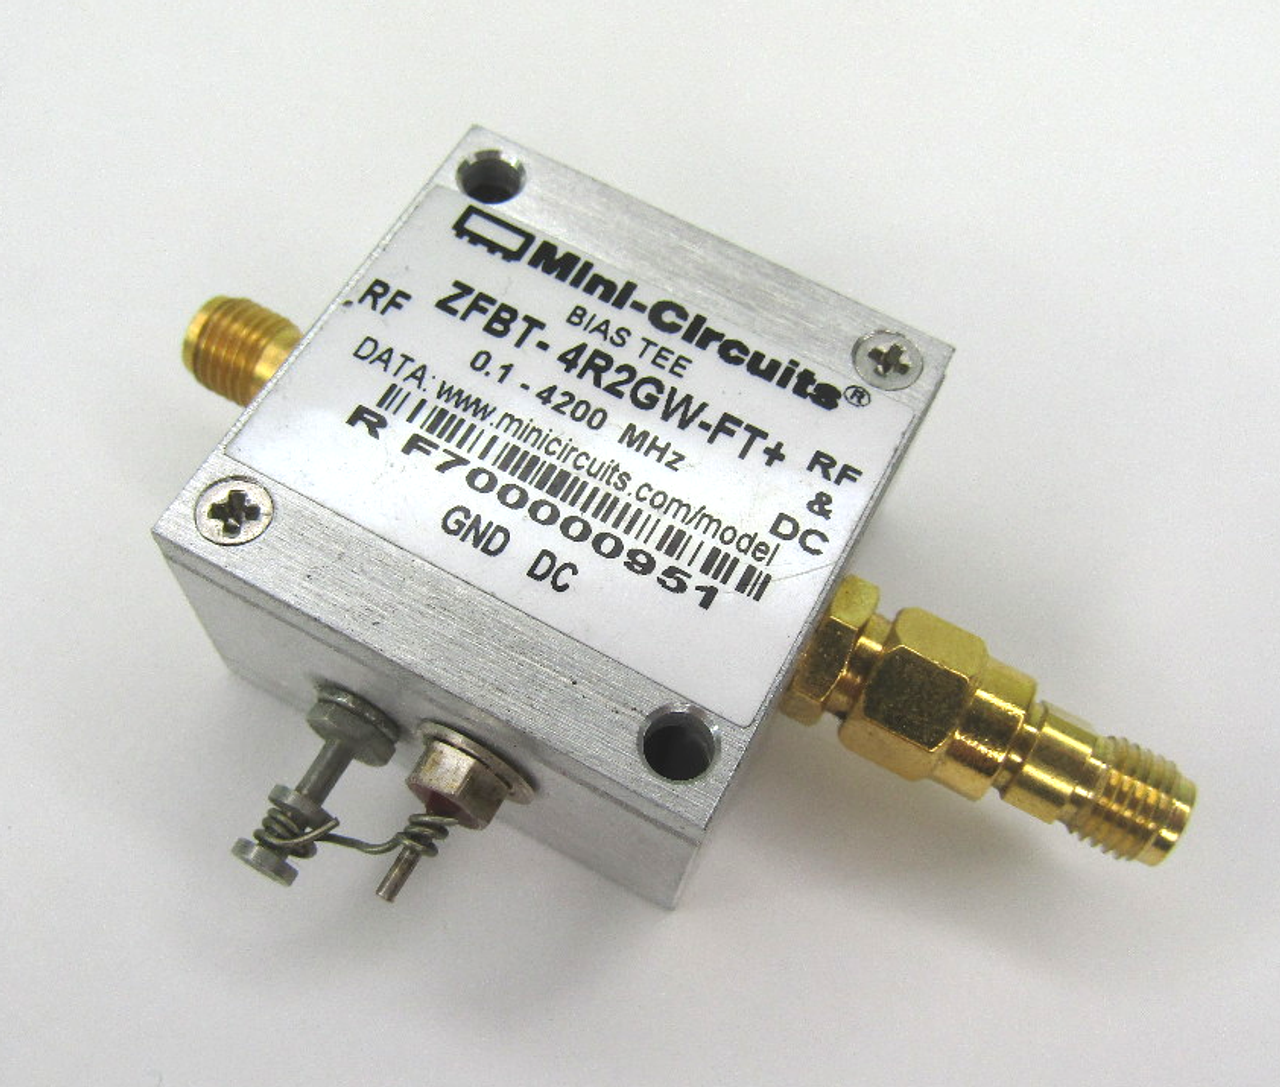 Details about   Mini-Circuits ZFBT-6GW Series Coaxial0.1 to 6000 MHz Bias-Tees 